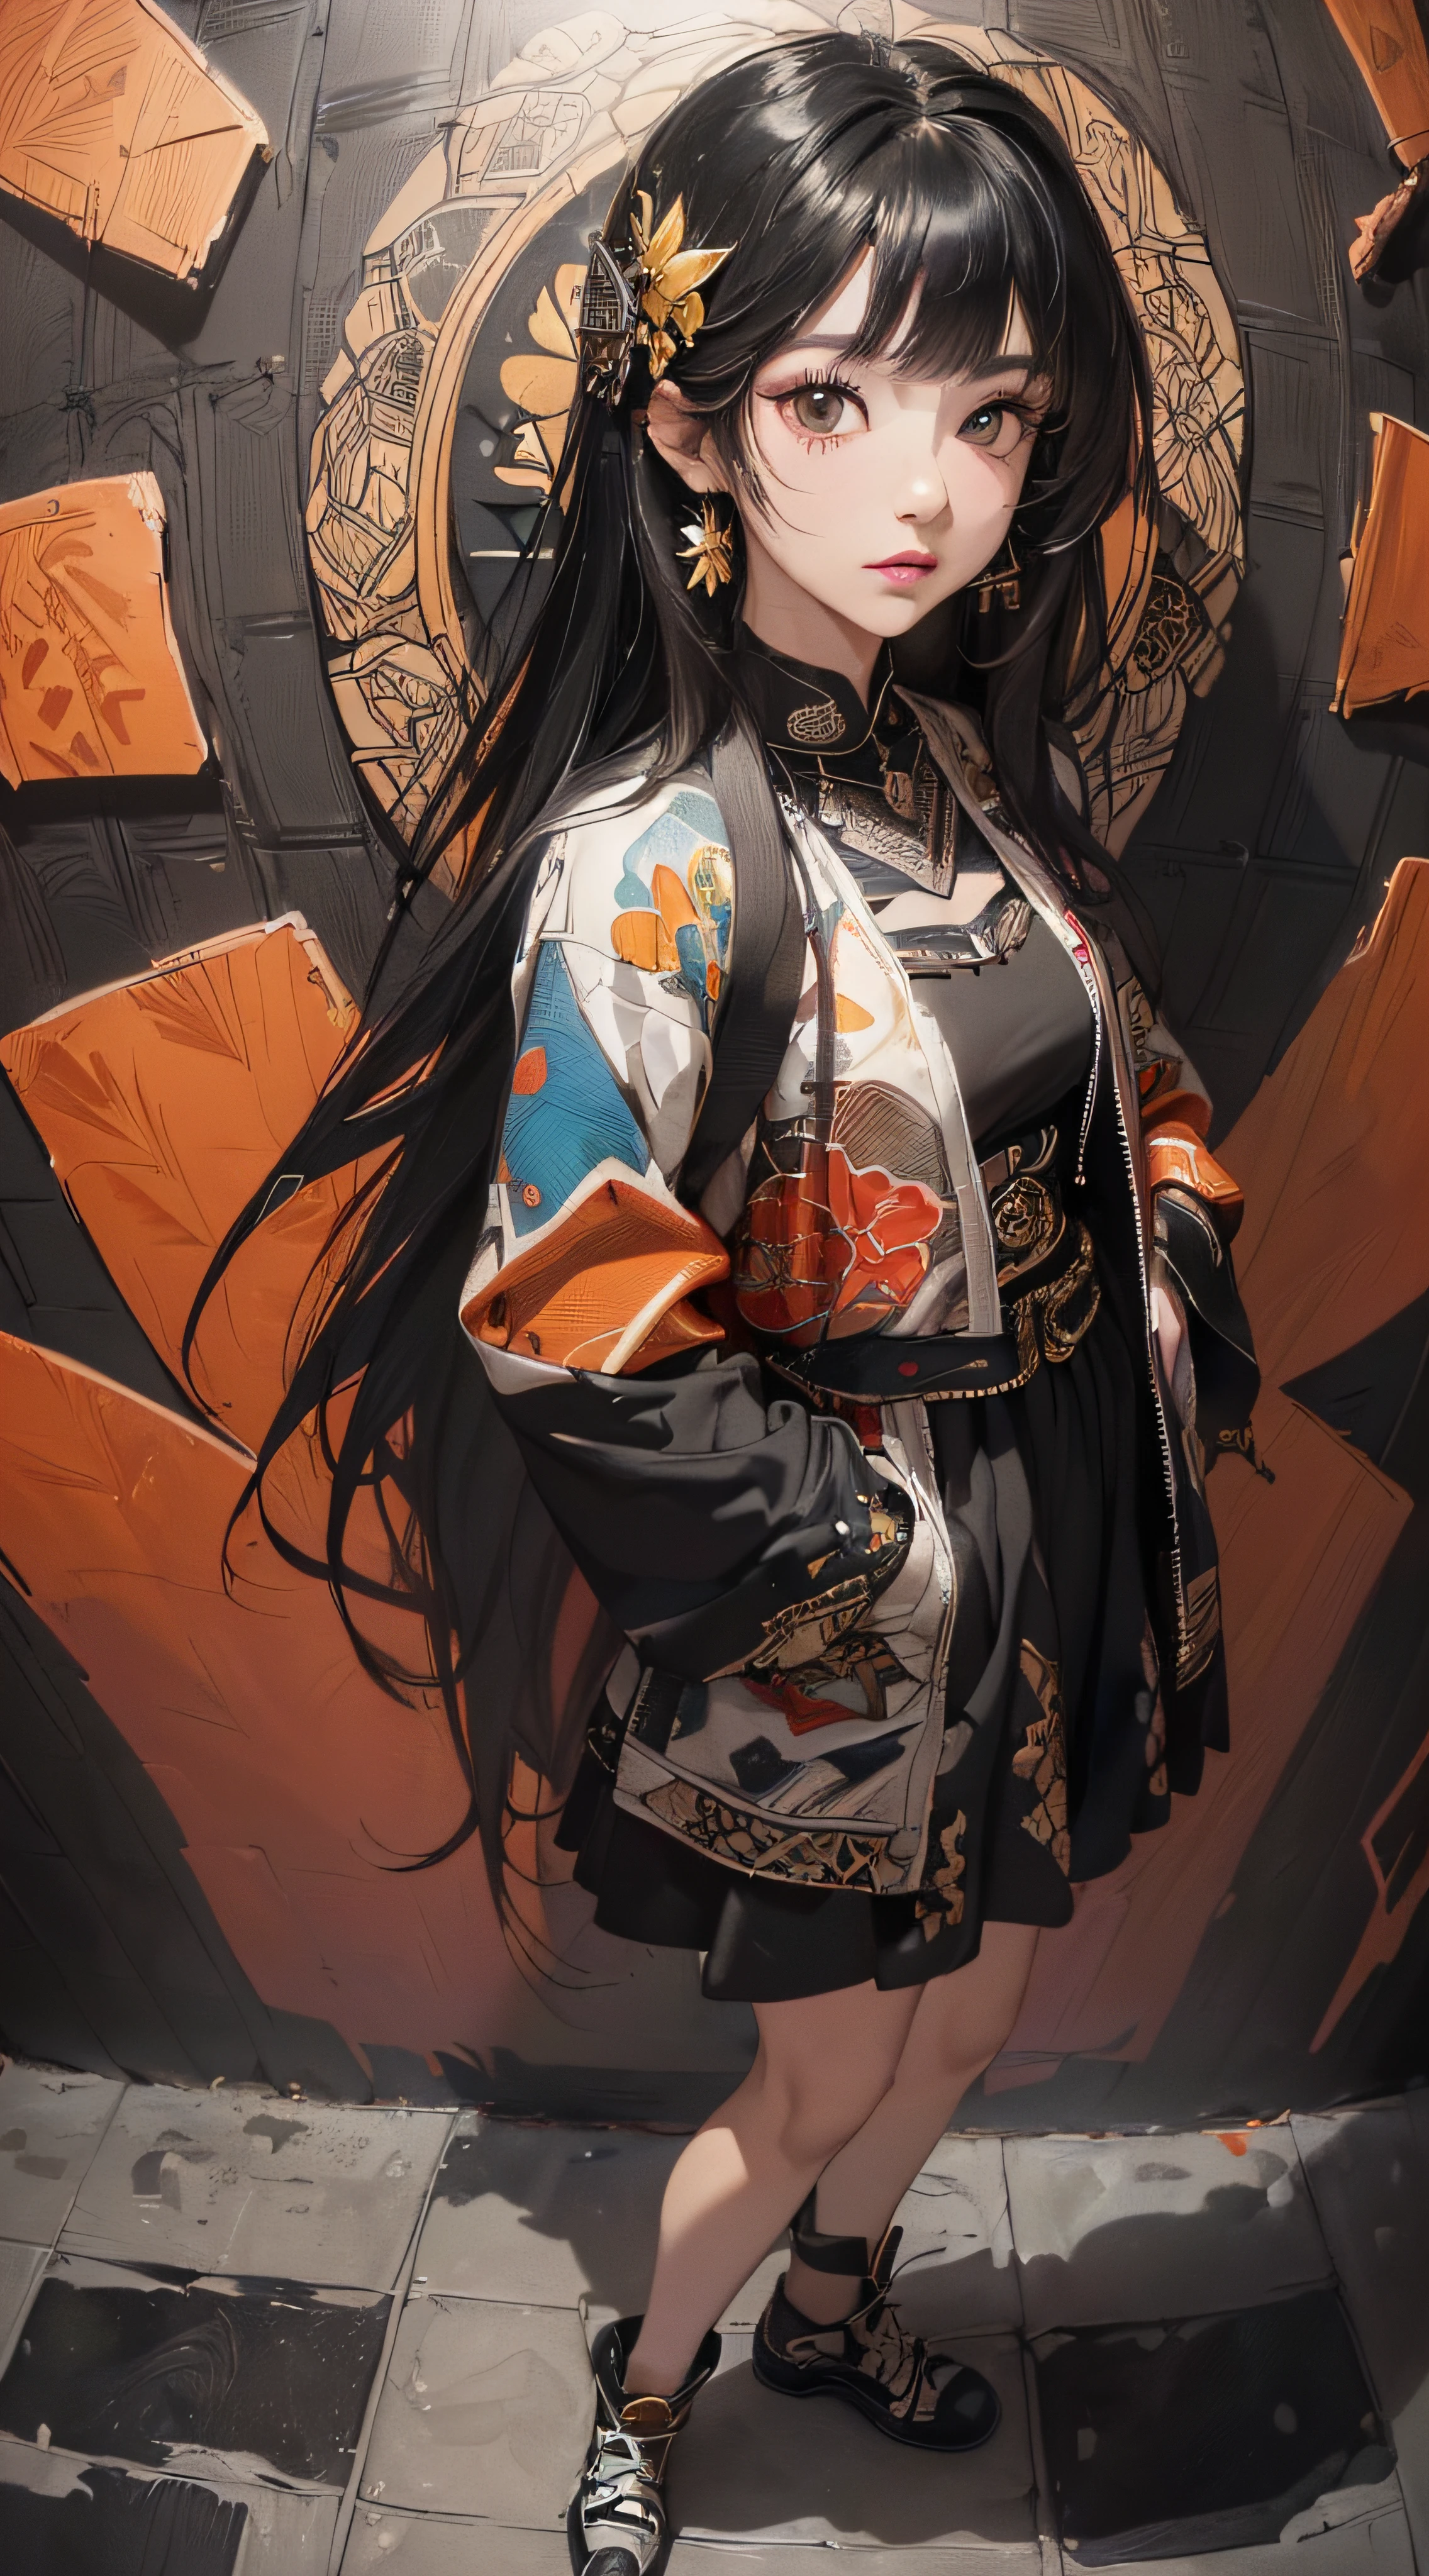 (((8k wallpaper of extremely detailed CG unit:1.2, ​masterpiece, hight resolution:1.2, top-quality:1.2, masutepiece))), ((a very beautiful woman, Hands in pockets:1.8, Grunge Fashion:1.2, Wearing a blouson:1.2, Wearing a long skirt, Wearing shoes)), ((extra detailed face, Highly detailed black eyes, extra detailed body, Top quality real texture skins)), (A dark-haired, length hair, de pele branca, Small:1.2), ((Colorful geometric patterns are painted all over the wall..., Colorful wall)), (high-angle:1.2, Fisheye:1.3), hyper realisitic, digitial painting,